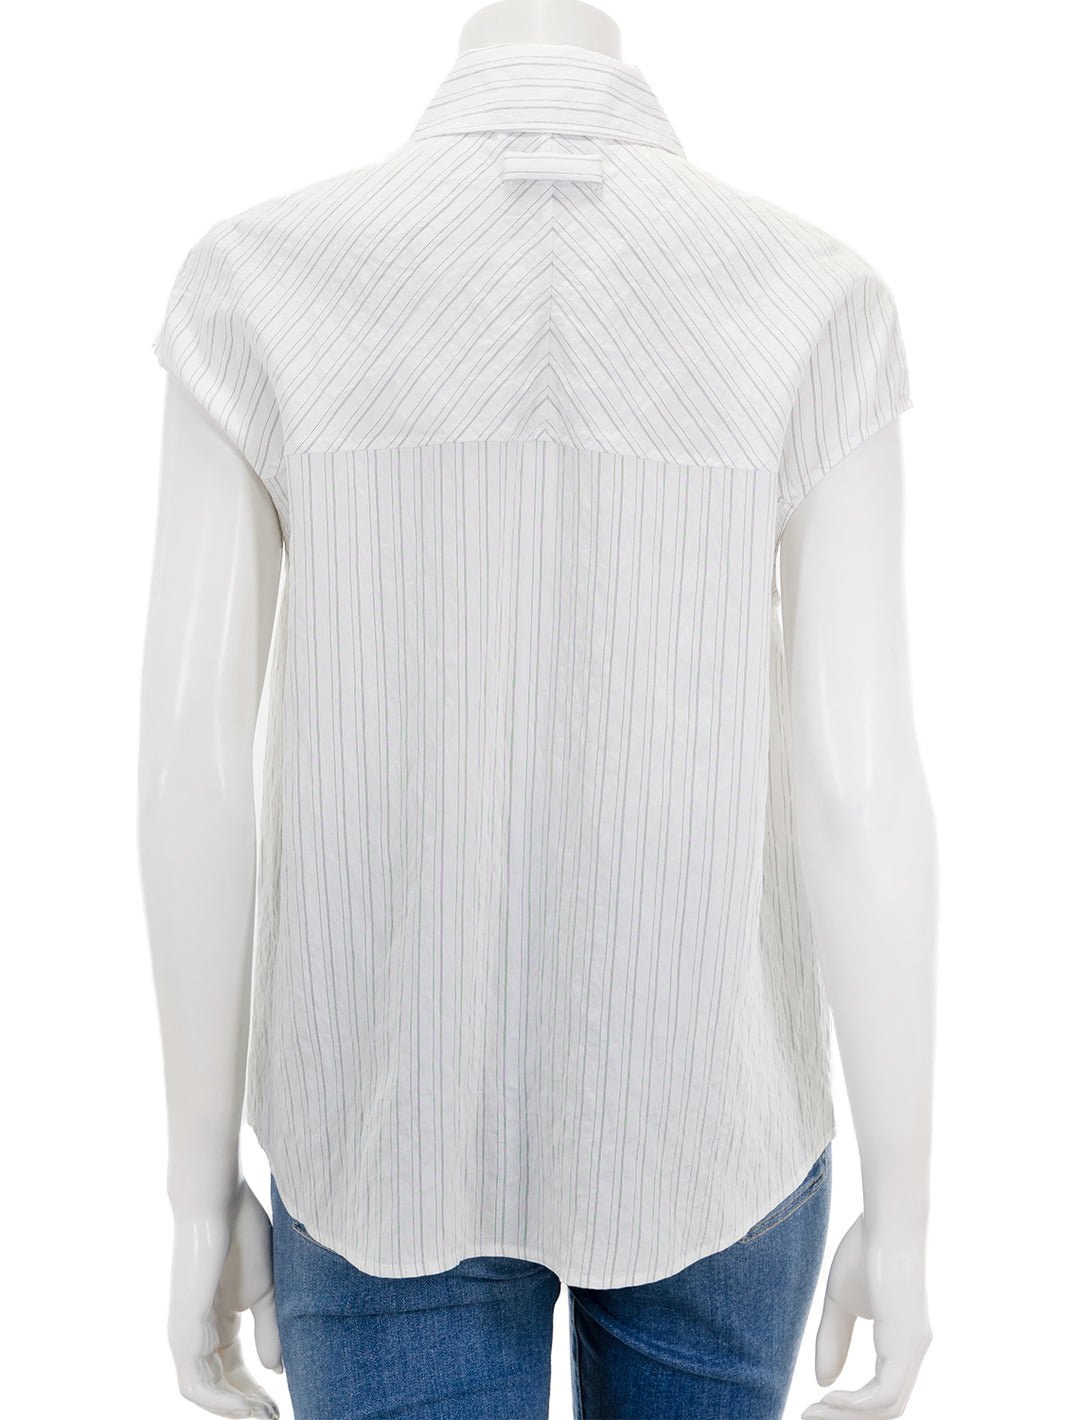 Back view of Saint Art's perth cap sleeve button blouse in off white pinstripe.